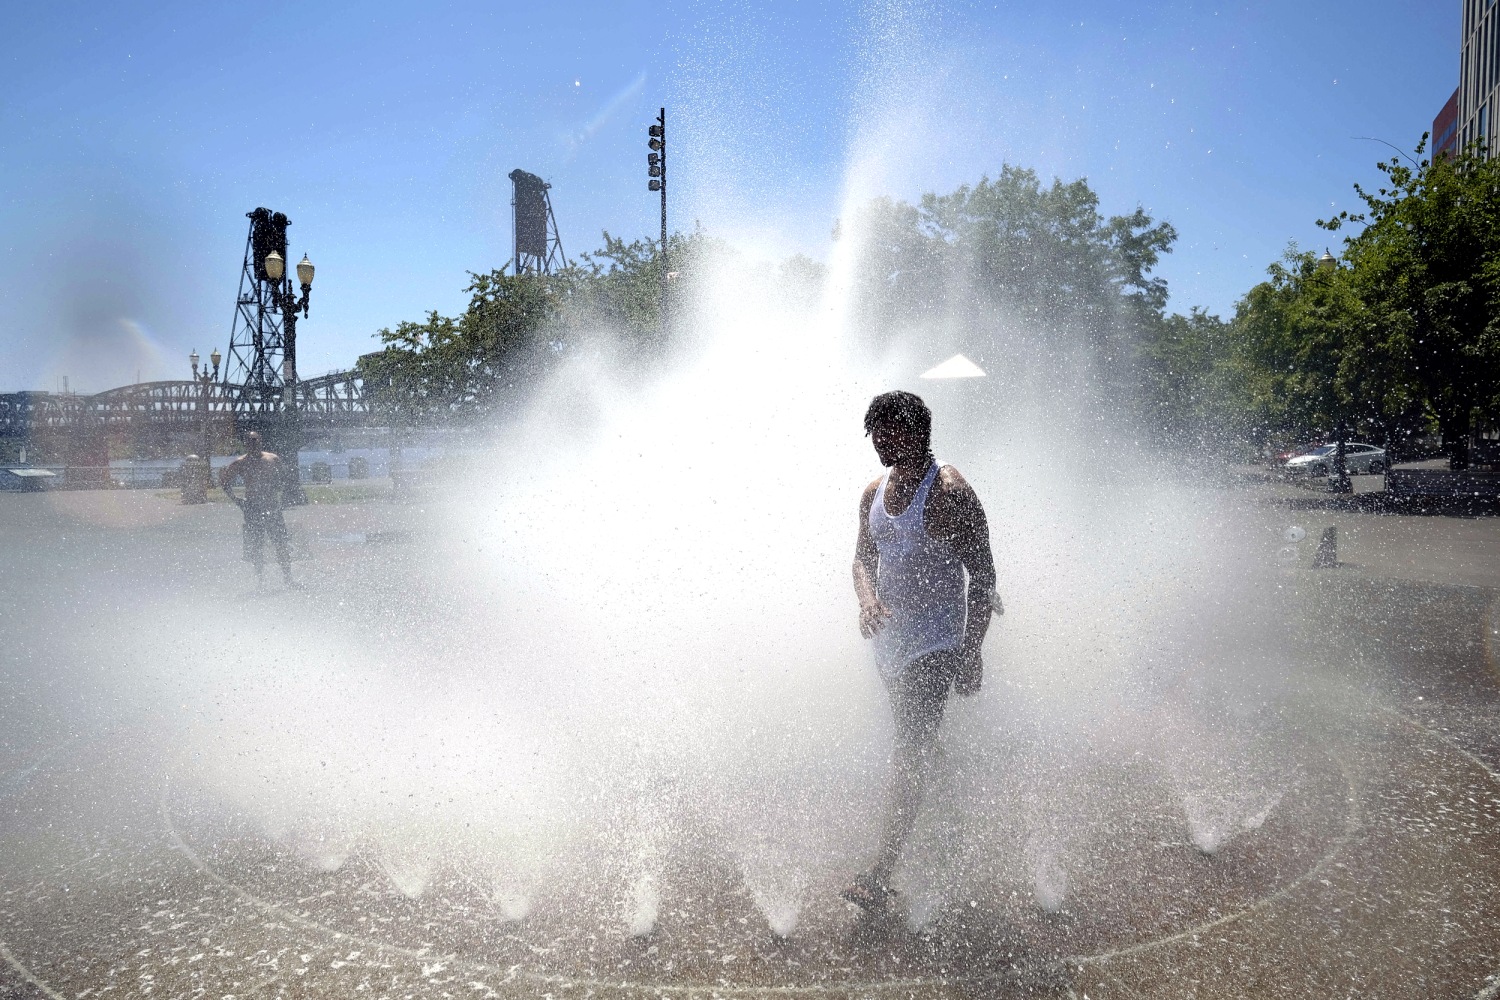 Heat wave on West Coast hints at climate change, scientists say